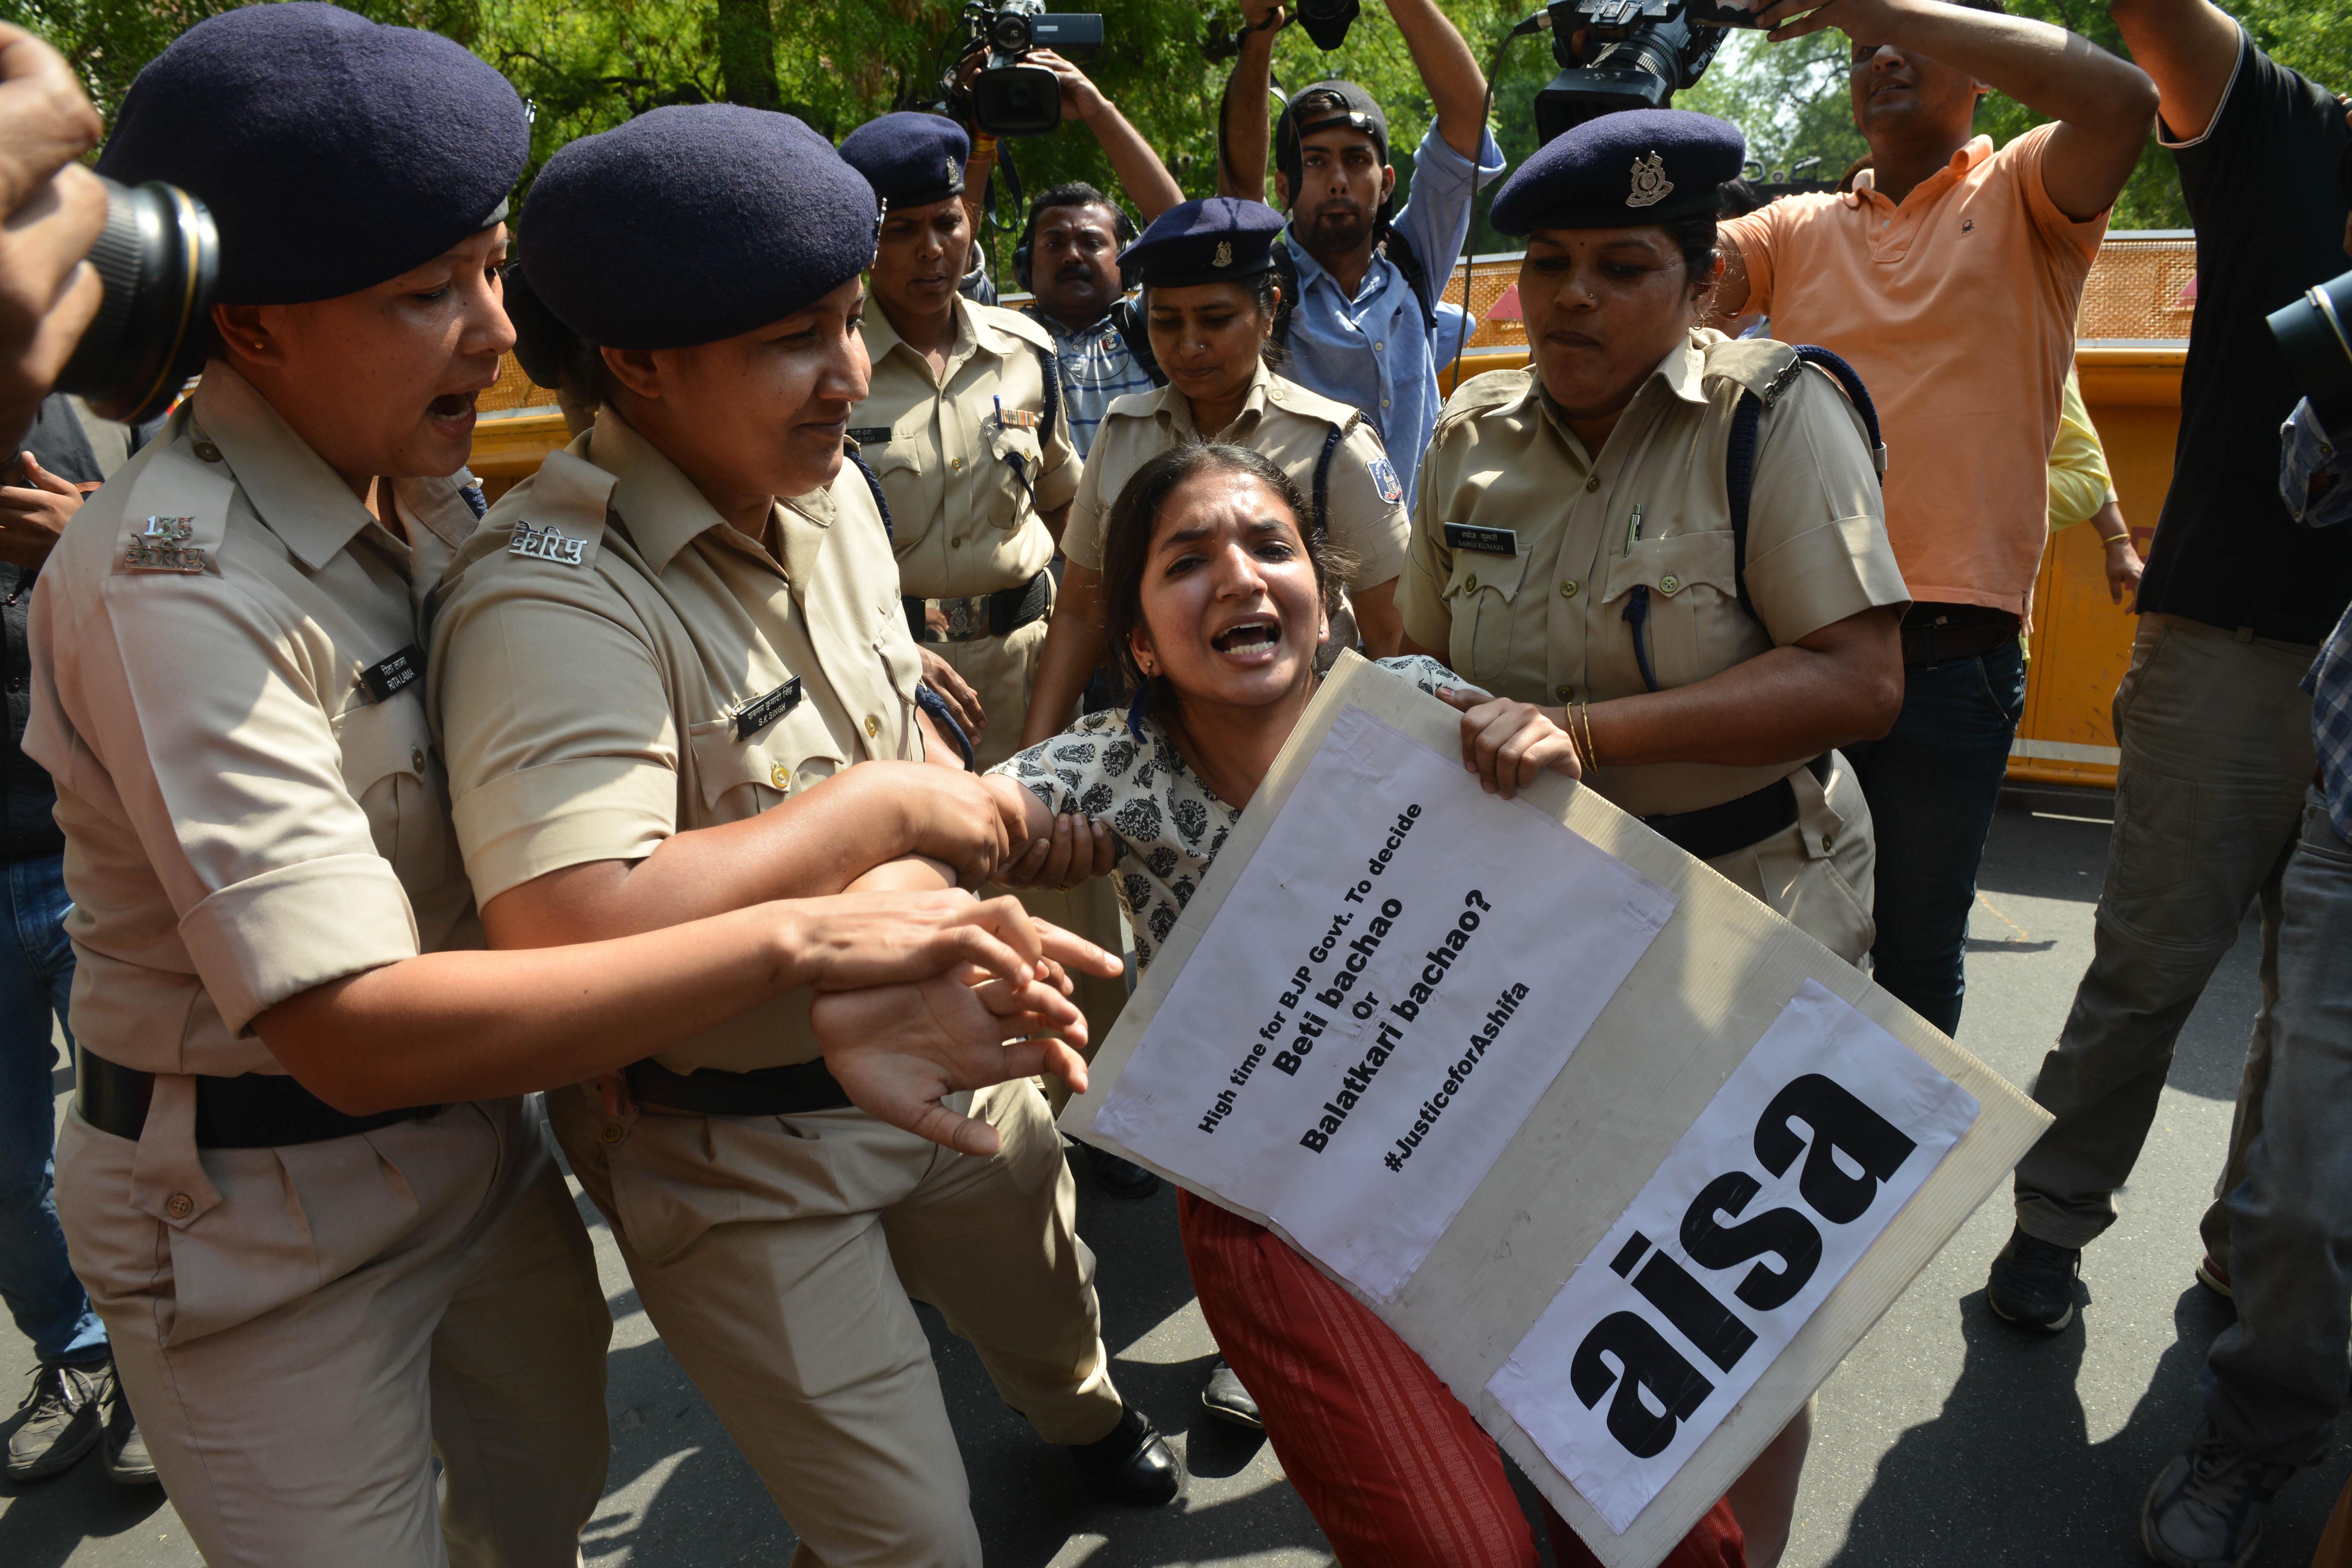 A protester at a demonstration against rape and other crimes against women in New Delhi on April 12, 2018